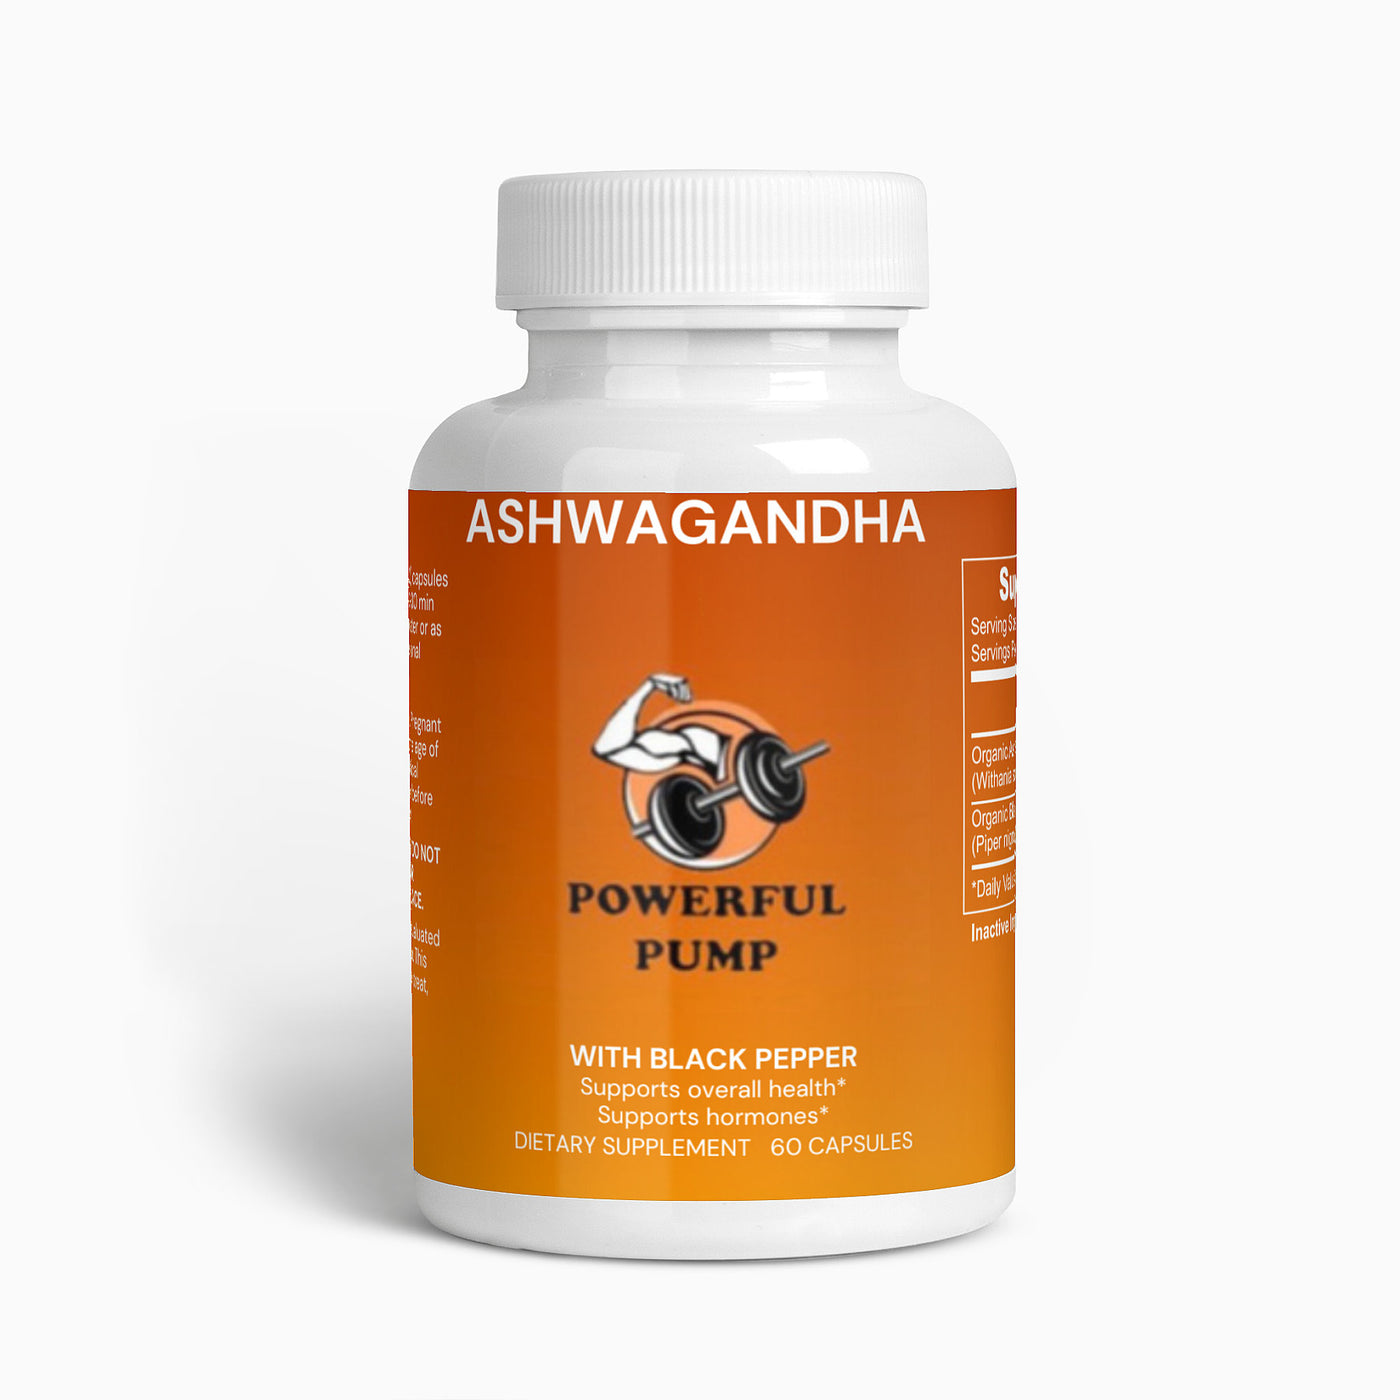 Ashwagandha - Herbal adaptogen for stress relief, enhanced energy, and overall well-being.